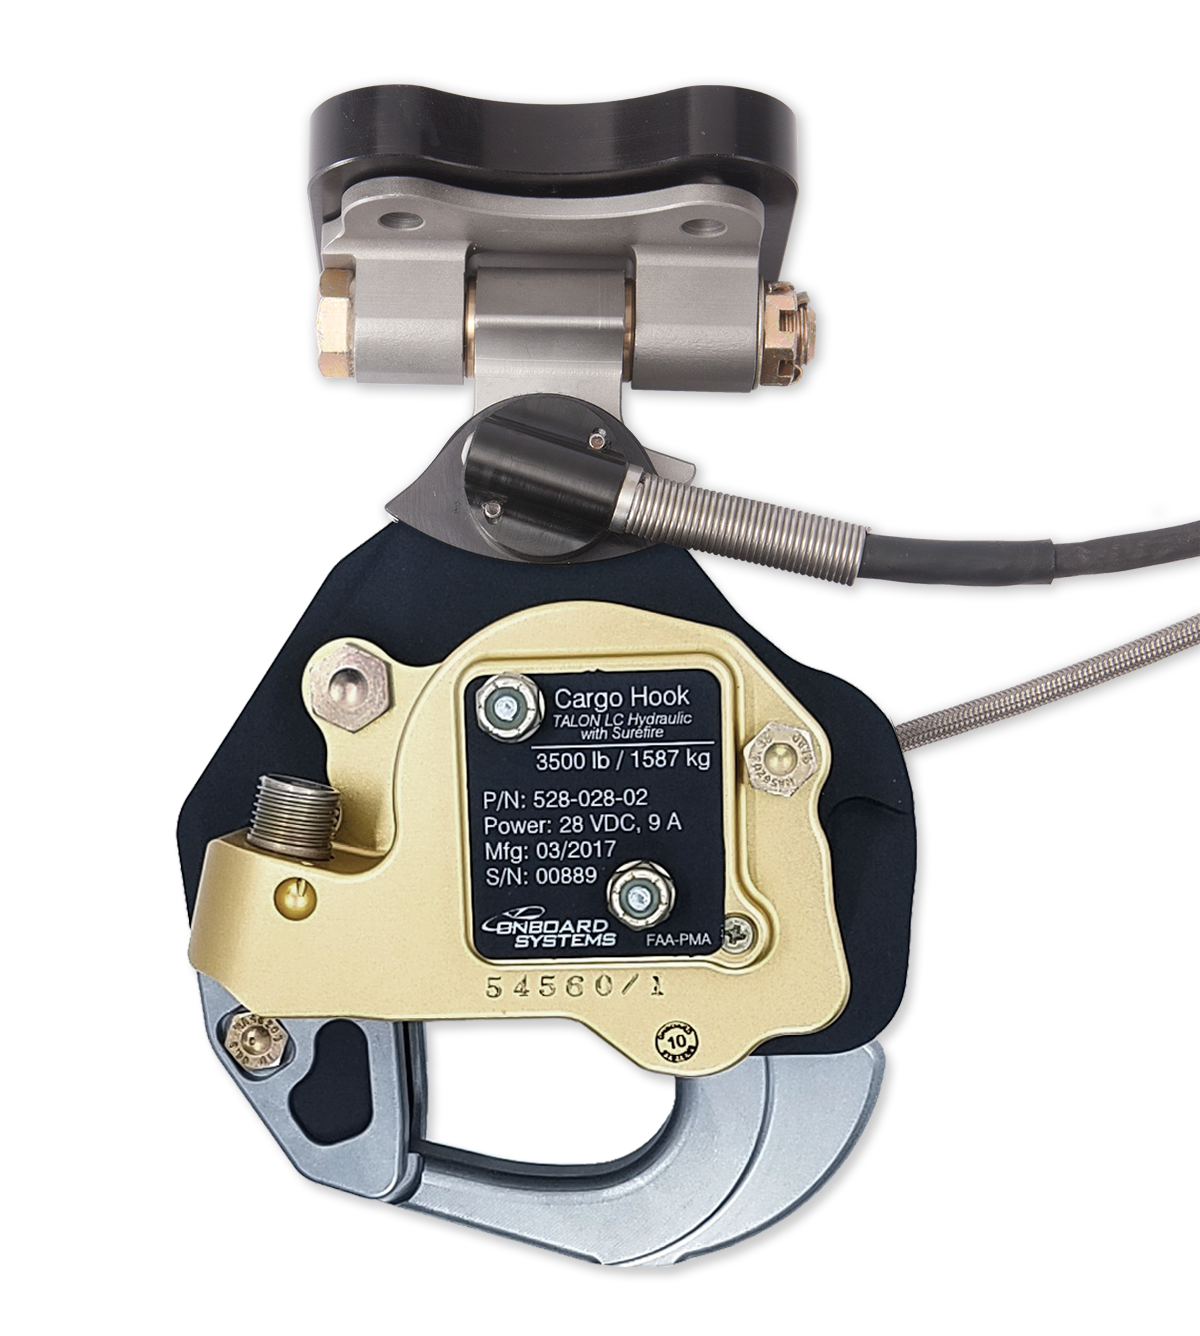 Onboard Systems MD500 Cargo Hook Kits with Surefire Release Technology Receive FAA Certification